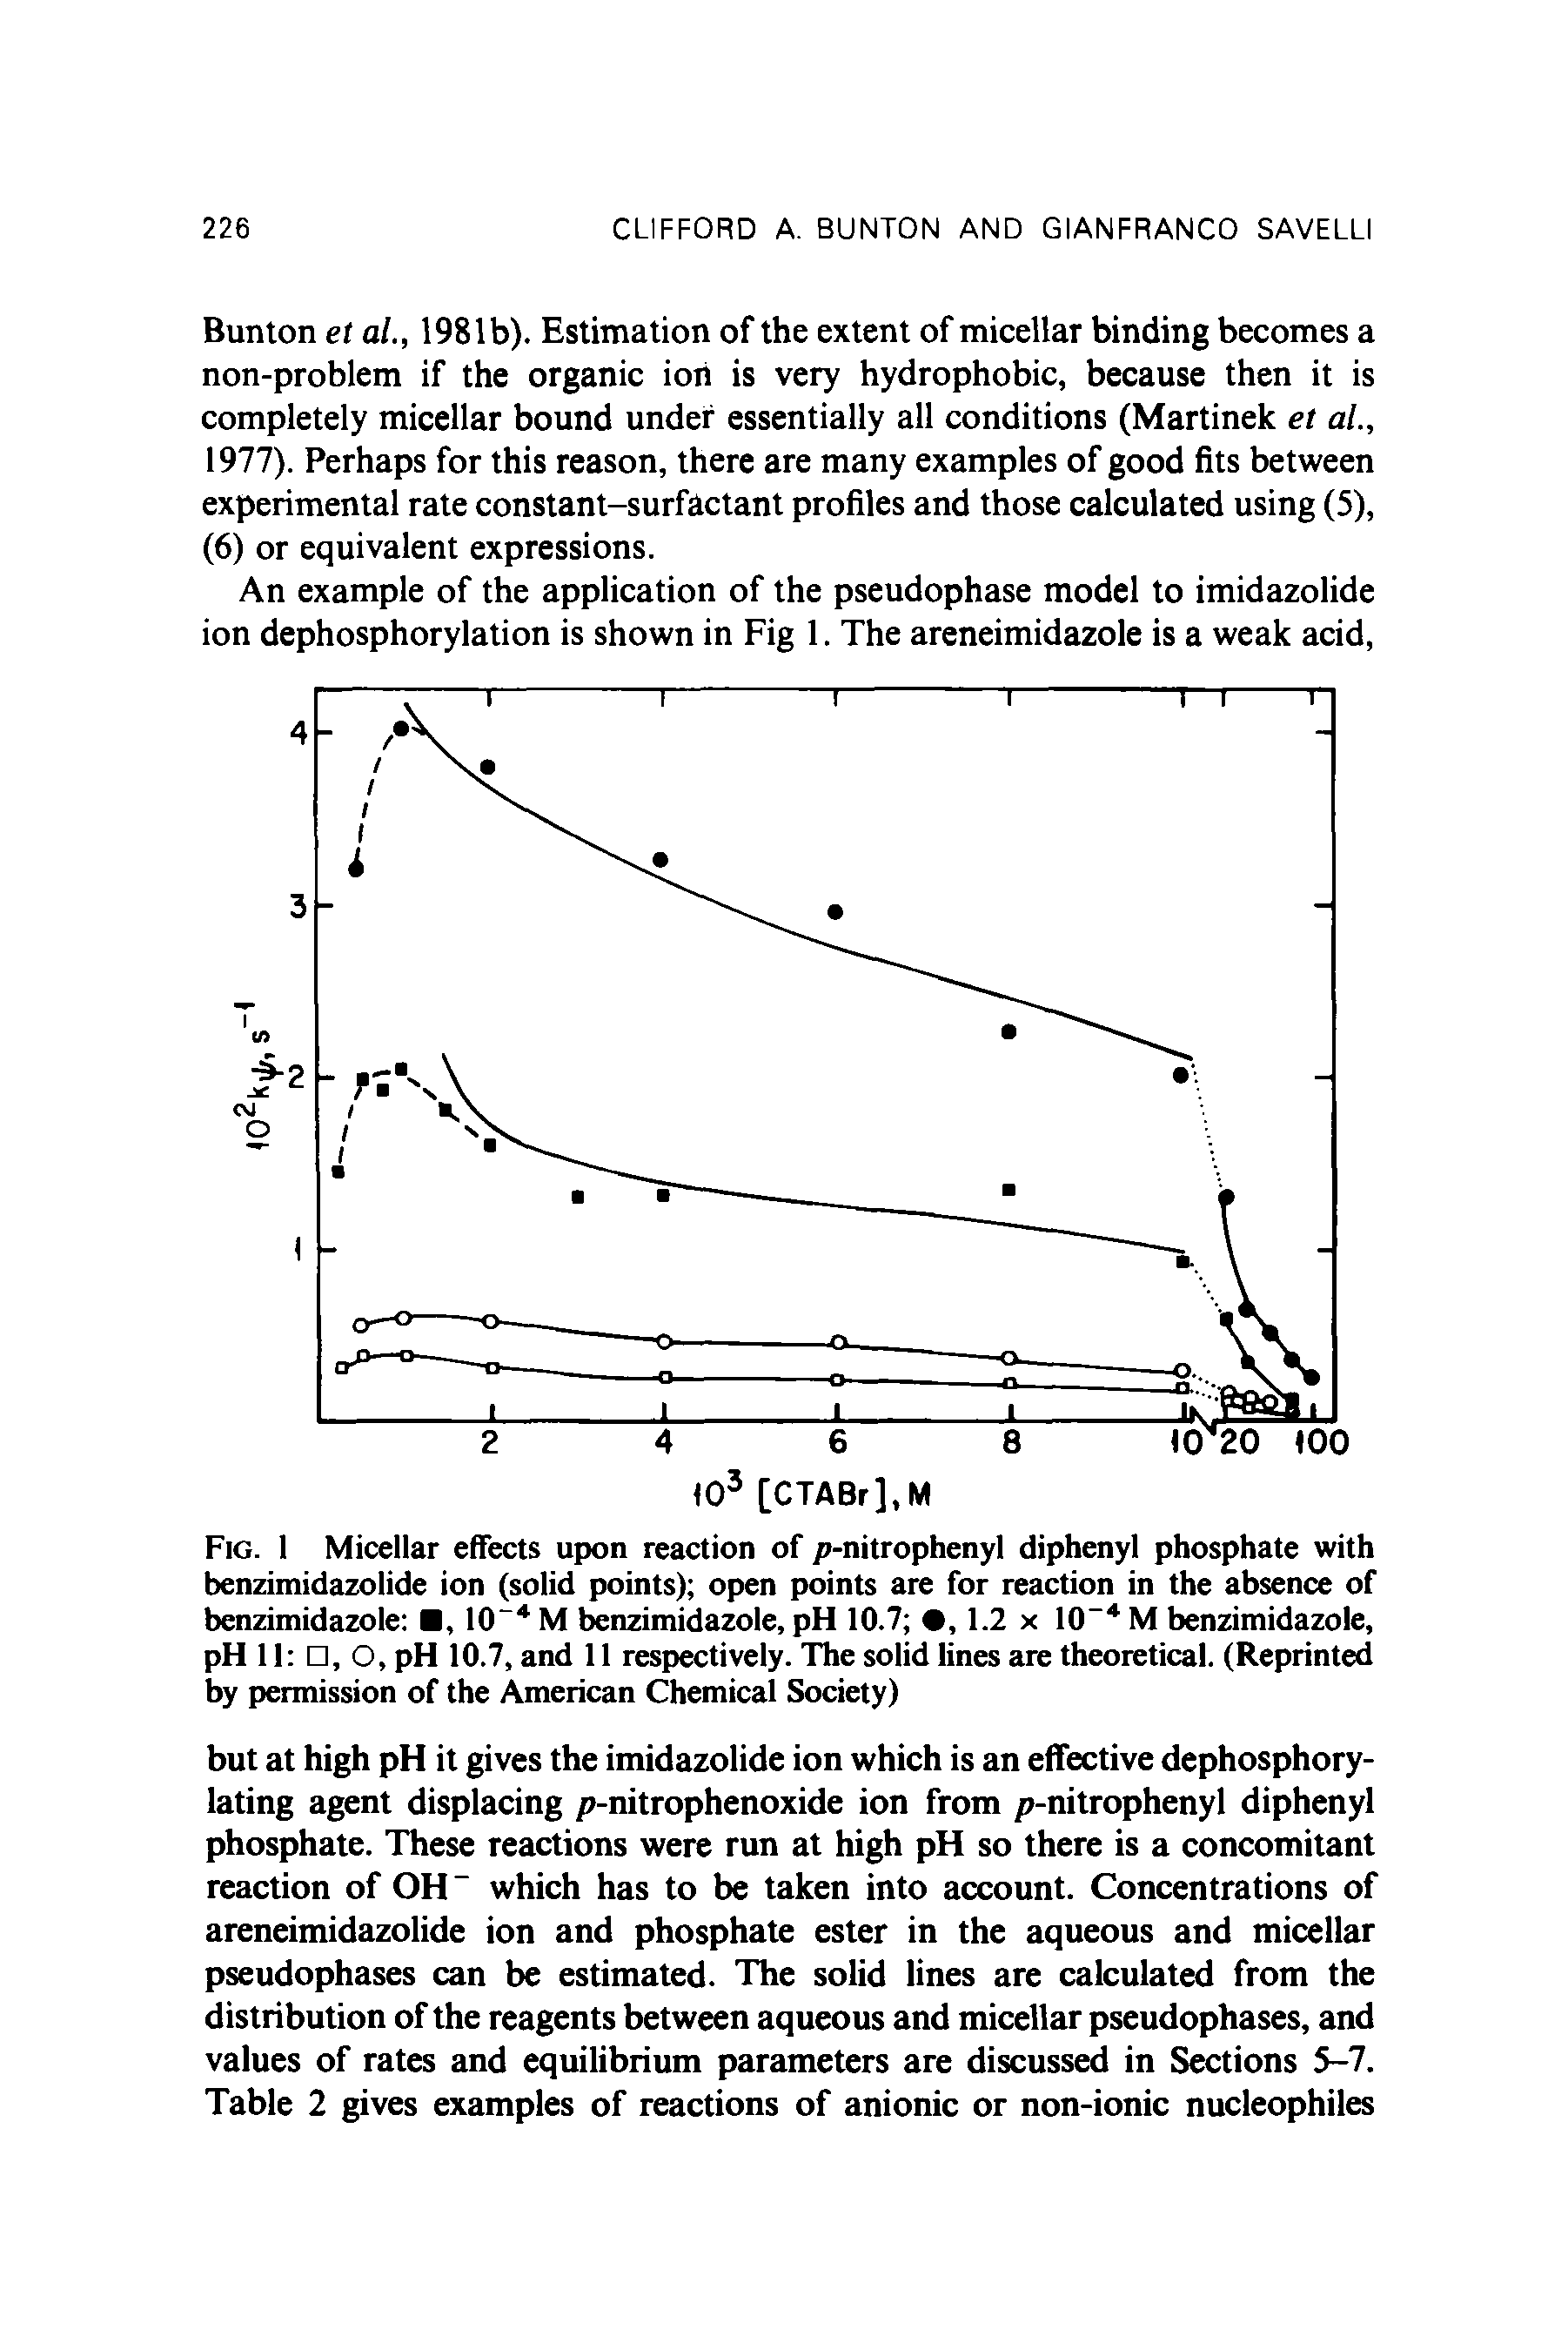 Fig. 1 Micellar effects upon reaction of p-nitrophenyl diphenyl phosphate with benzimidazolide ion (solid points) open points are for reaction in the absence of benzimidazole , 10 4 M benzimidazole, pH 10.7 , 1.2 x 10-4 M benzimidazole, pH 11 O, pH 10.7, and 11 respectively. The solid lines are theoretical. (Reprinted by permission of the American Chemical Society)...